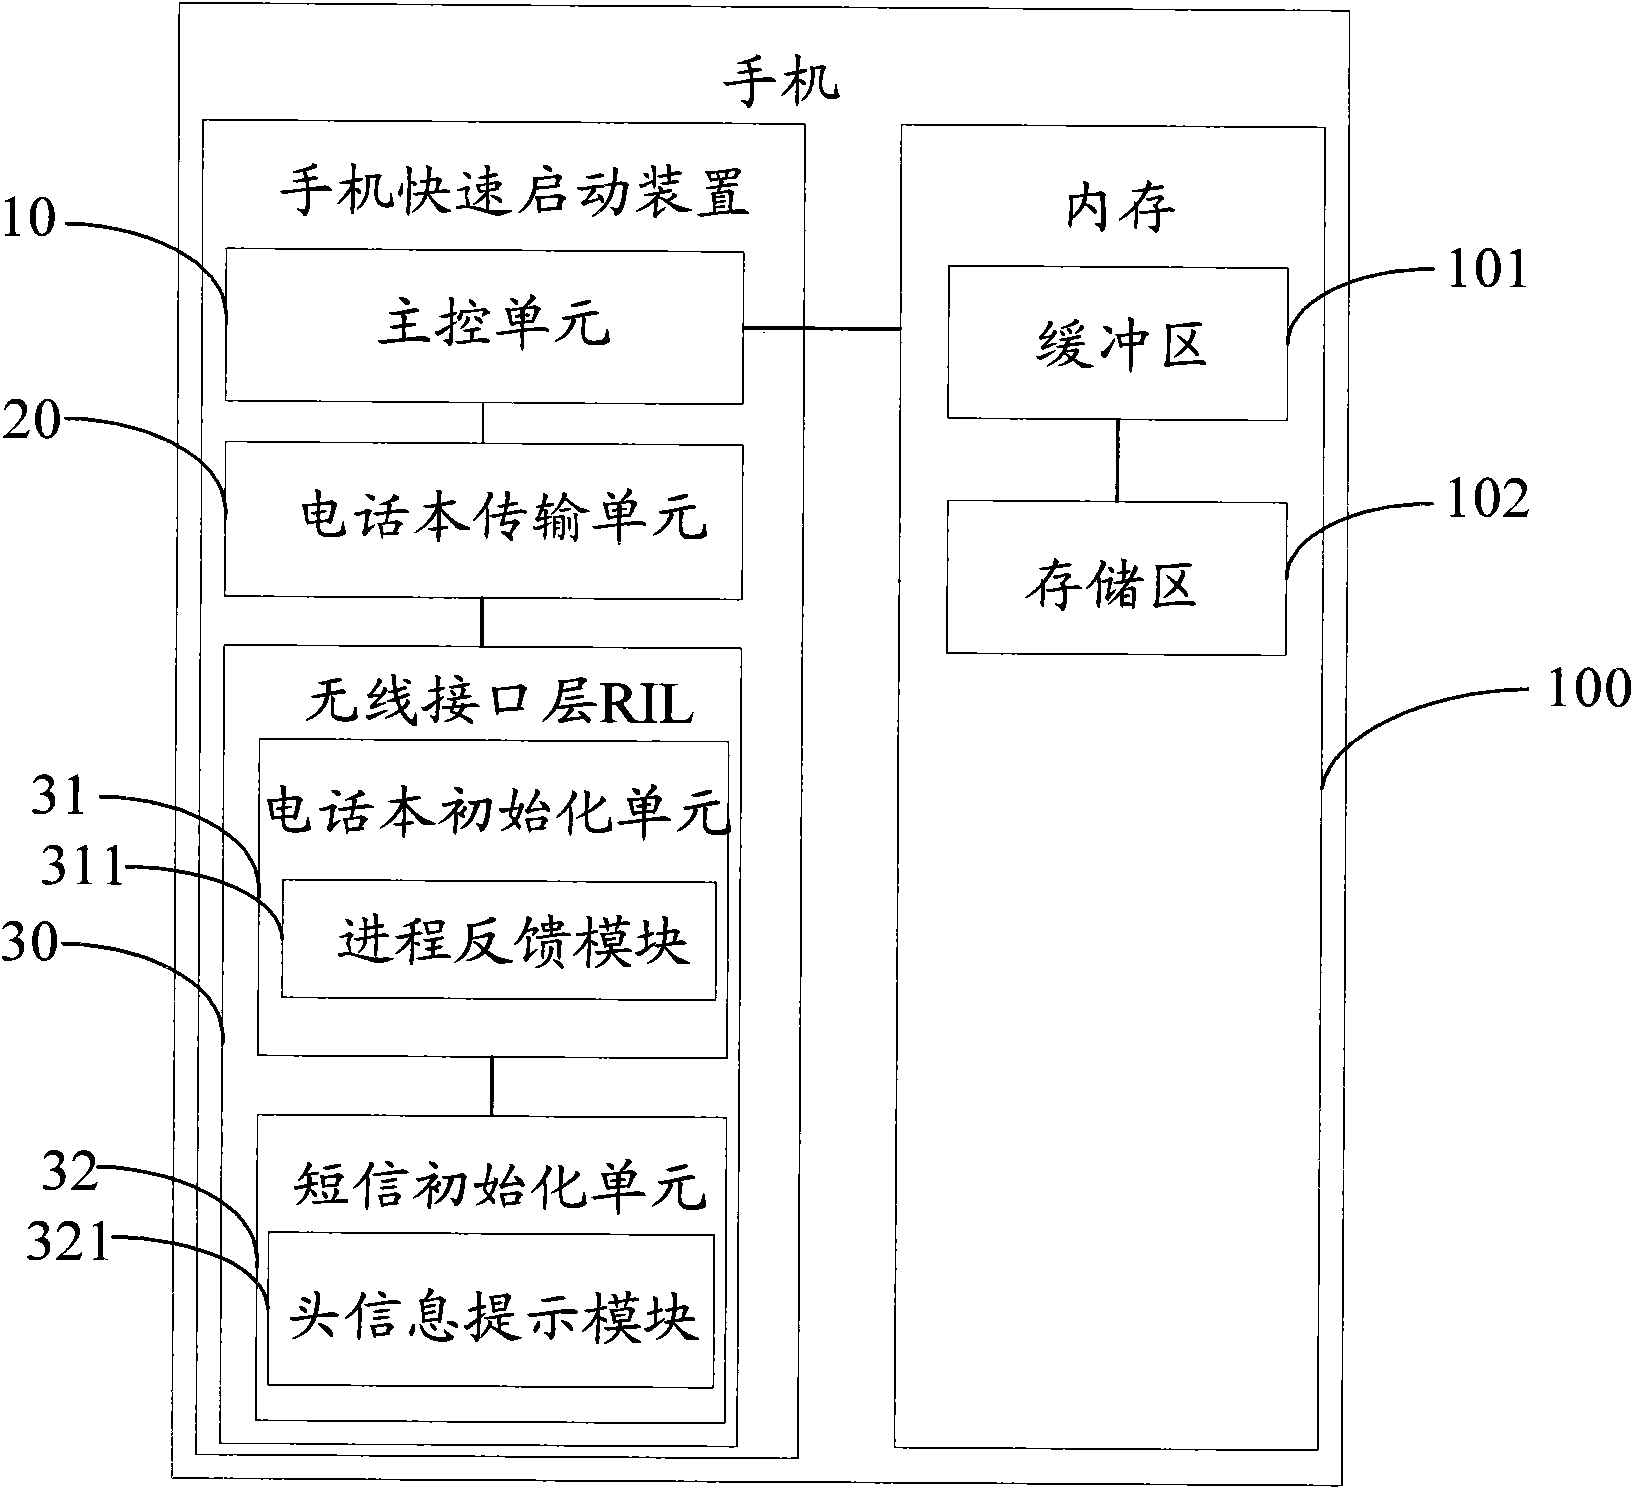 Method and device for rapidly starting mobile phones and mobile phone